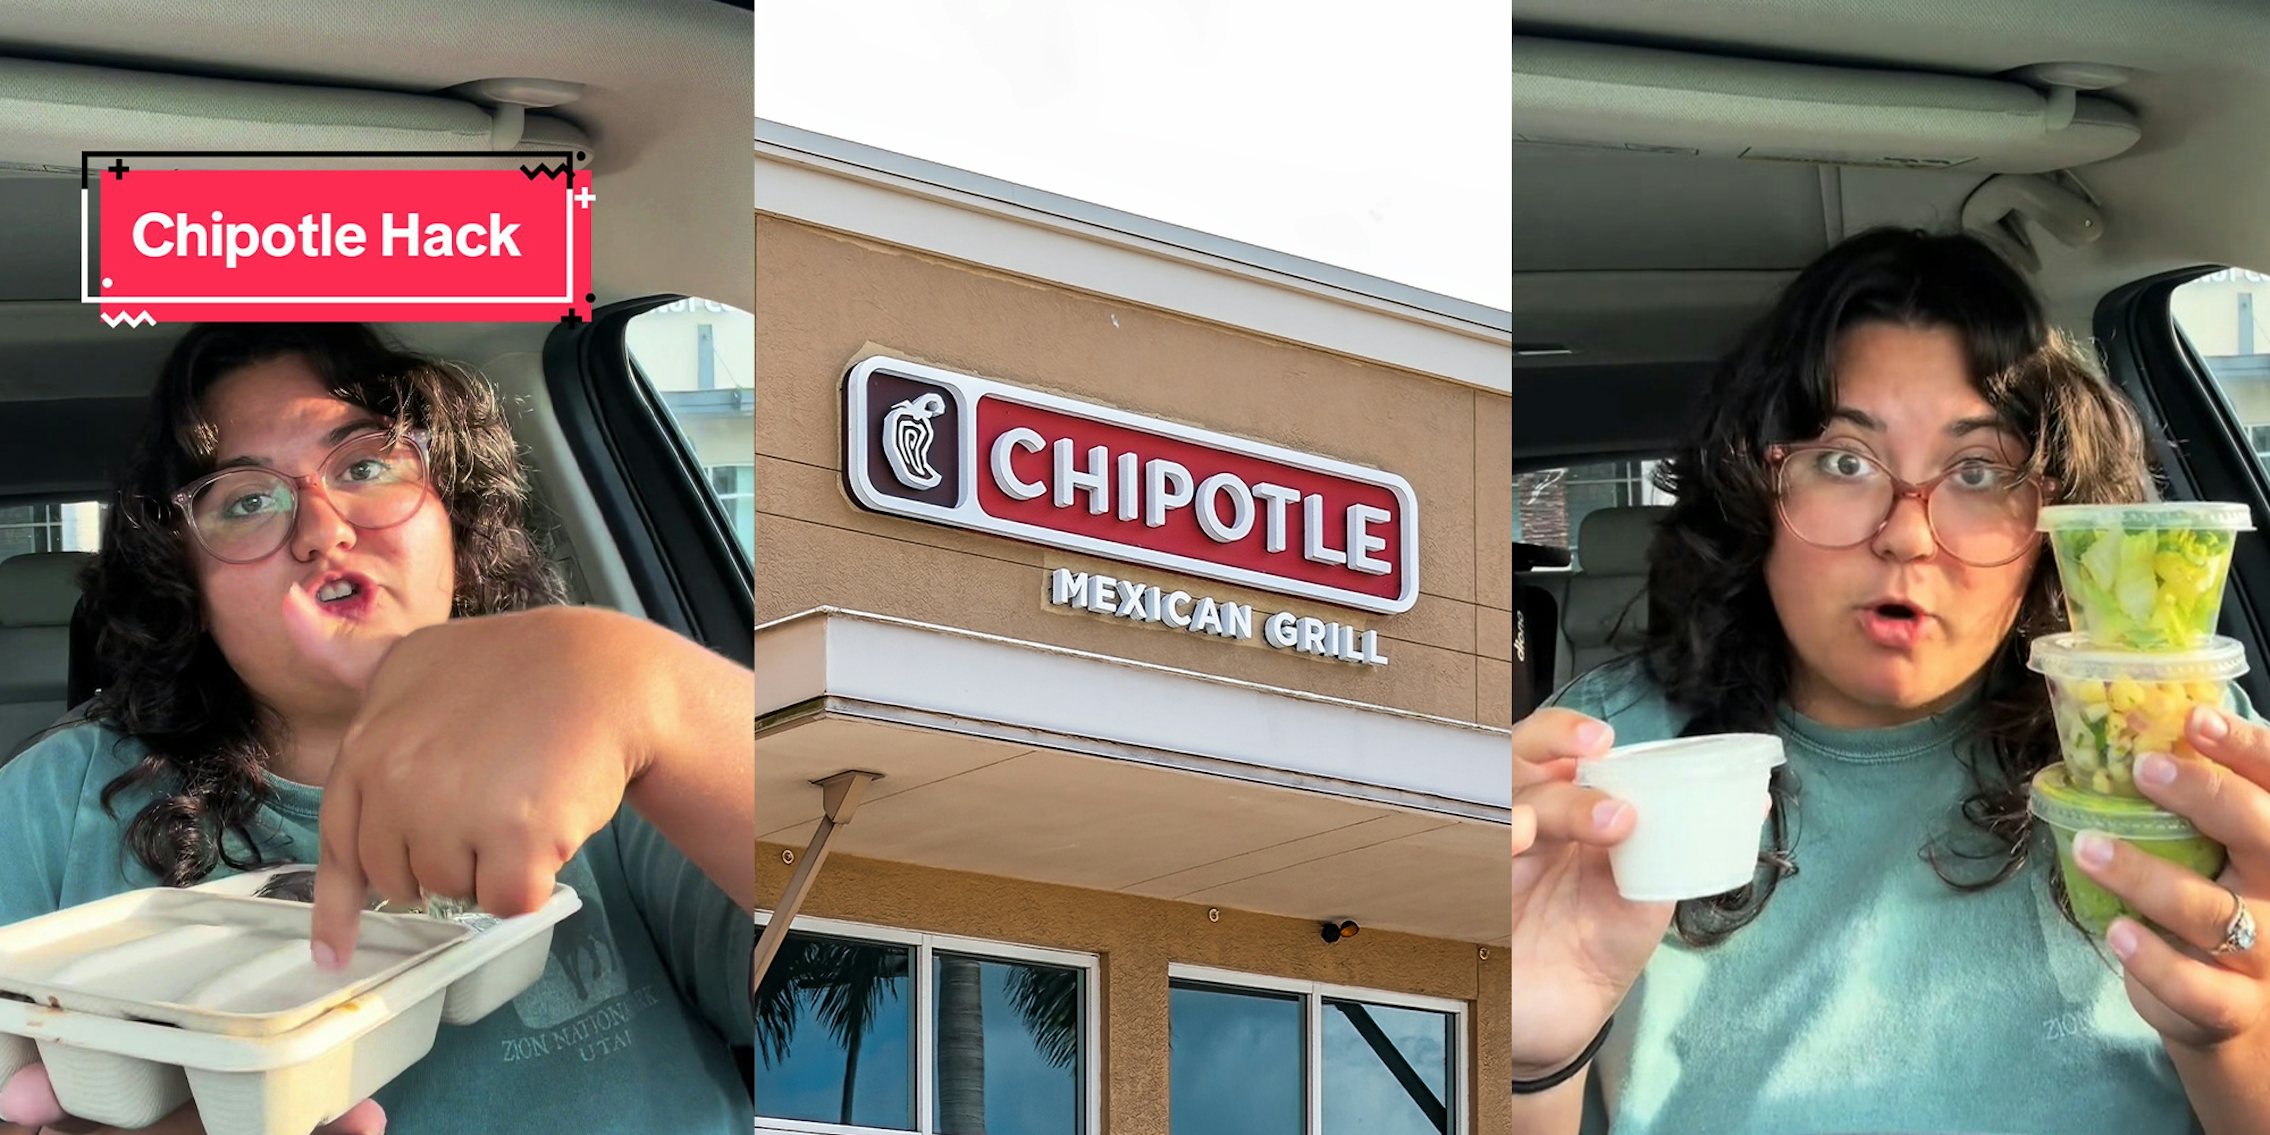 Woman Shares $5 Chipotle hack